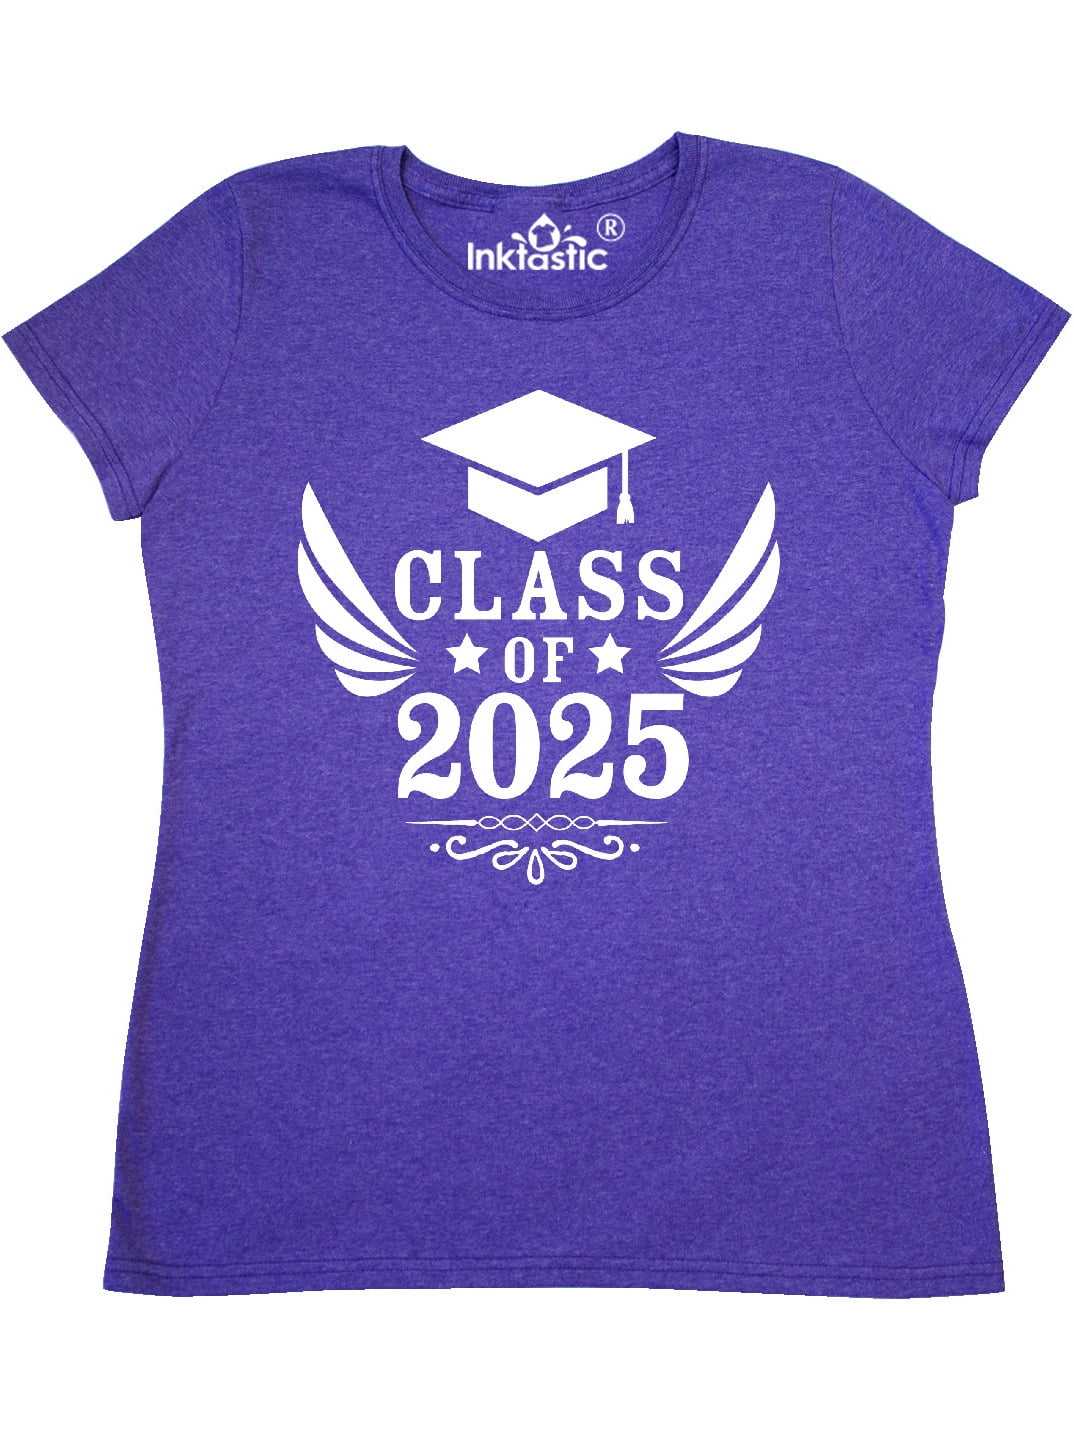 INKtastic Class of 2025 with Graduation Cap and Wings Women's TShirt